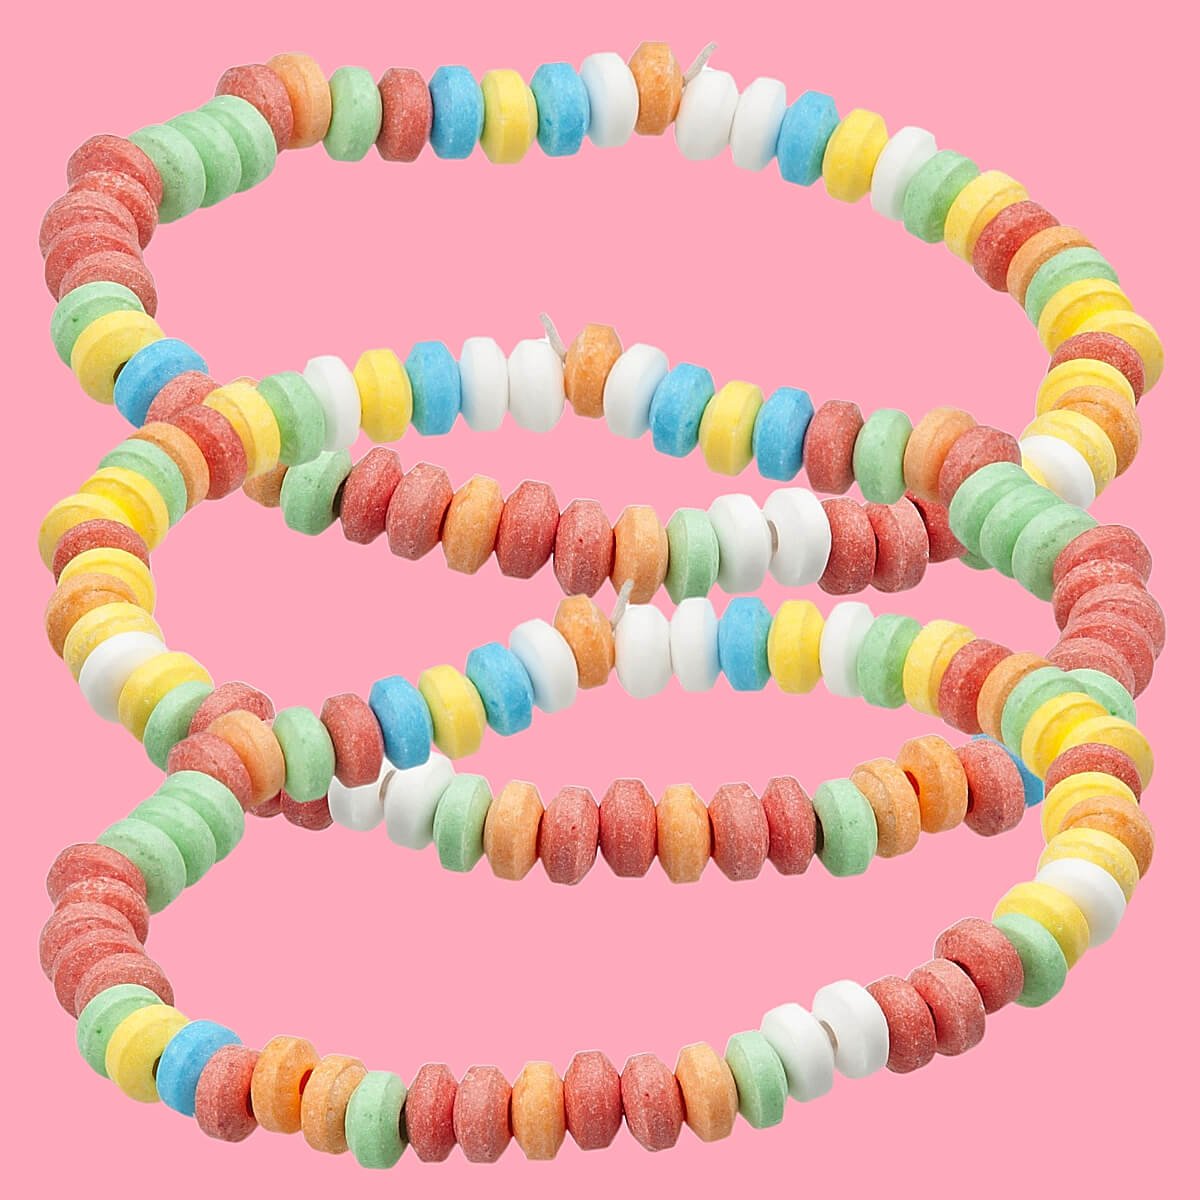 Three Candy Necklaces overlapping, multi-coloured sweets on a string